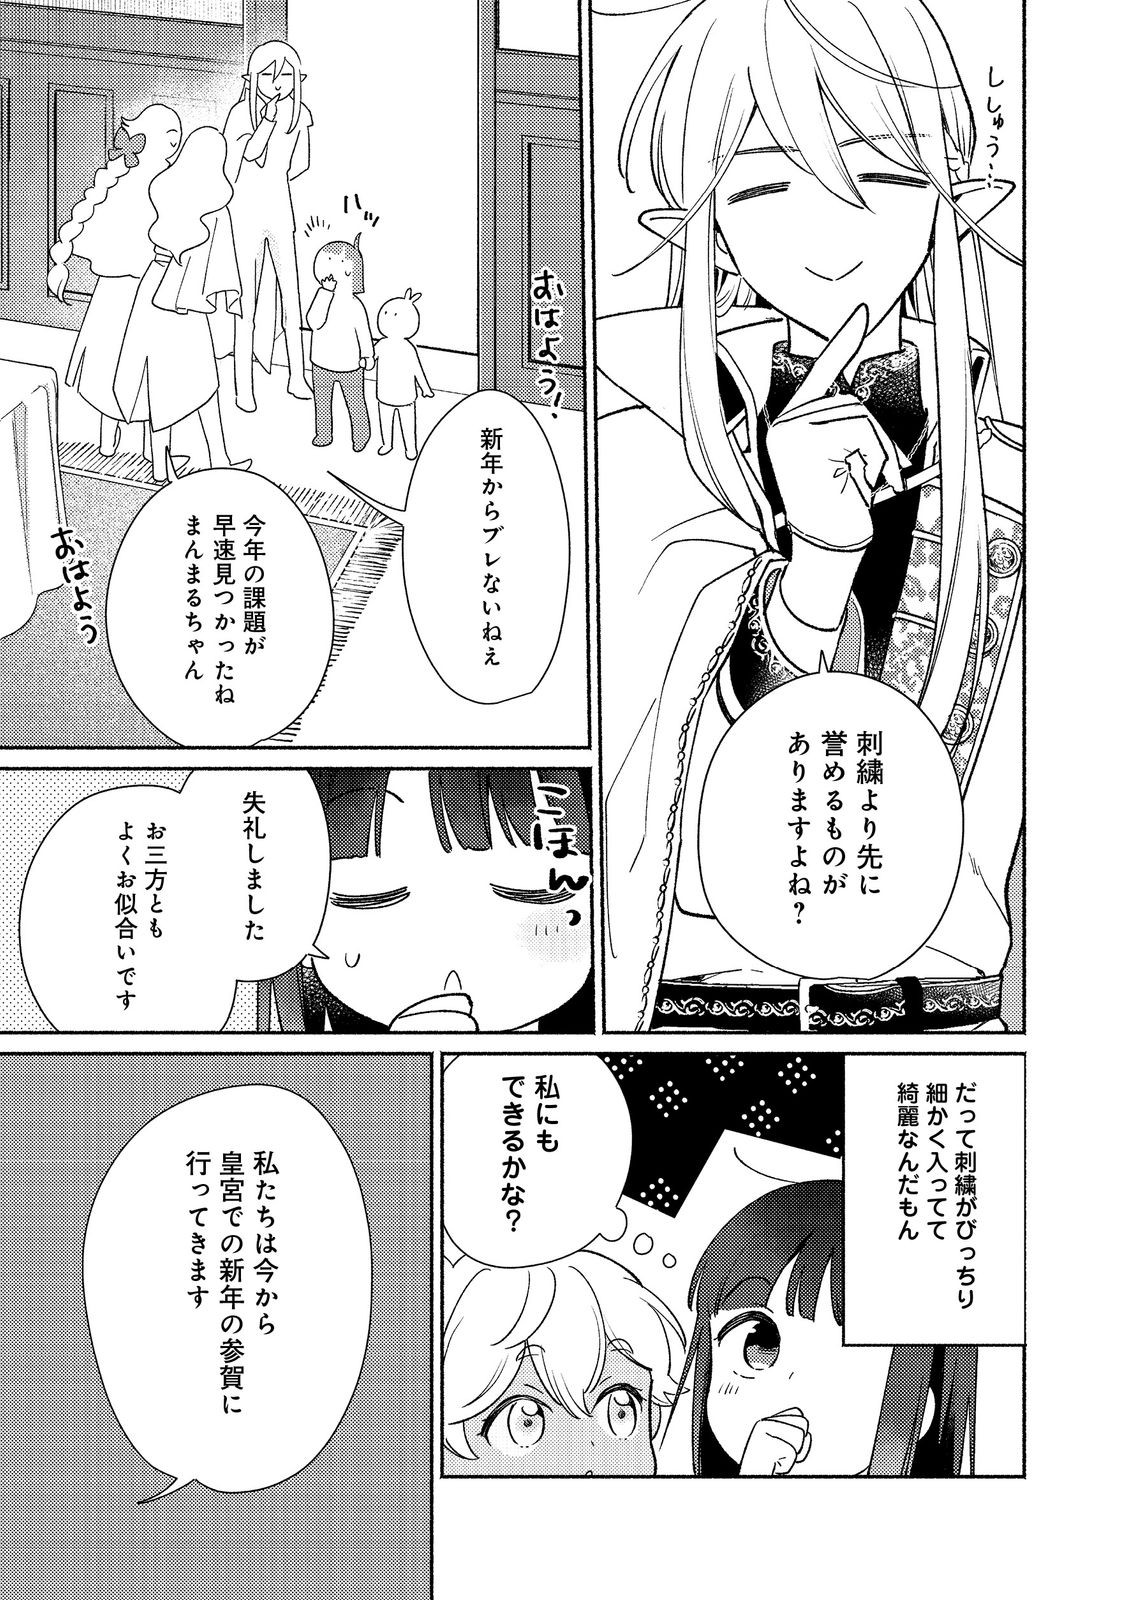 I’m the White Pig Nobleman 第26.1話 - Page 5